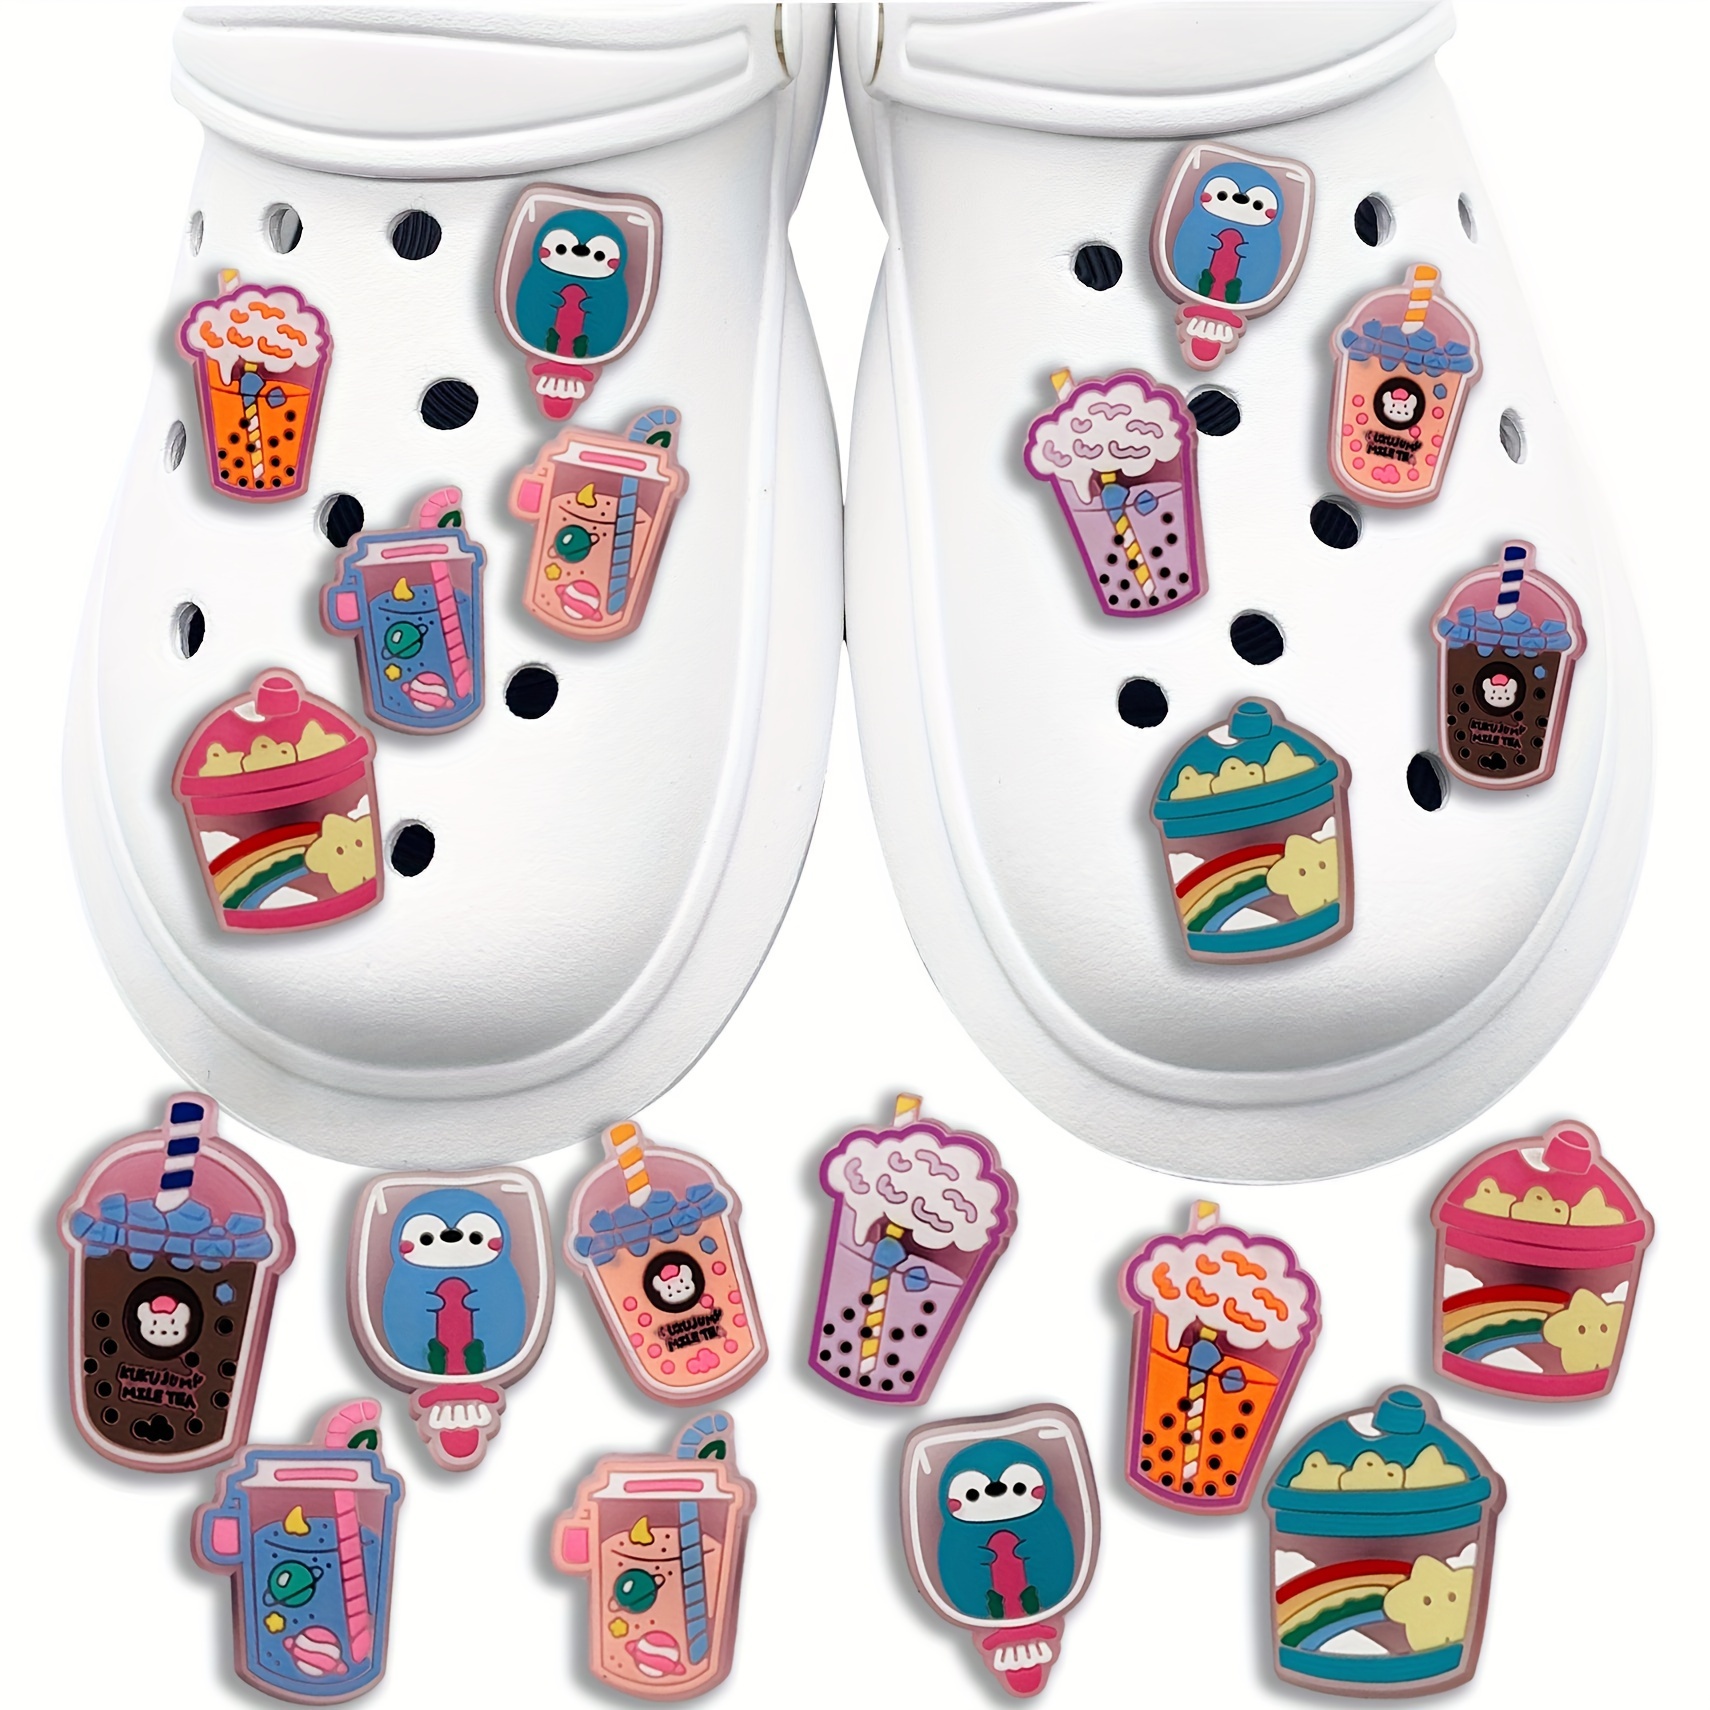  Ylxzuje Charms for Shoes Clogs Bubble Slides Sandals, 22 Pcs  Cute Gummy Resin Bear Charms, Girls Teens Women Adults Bling Shoe Charms  Accessories DIY Gifts : Ylxzuje: Clothing, Shoes & Jewelry